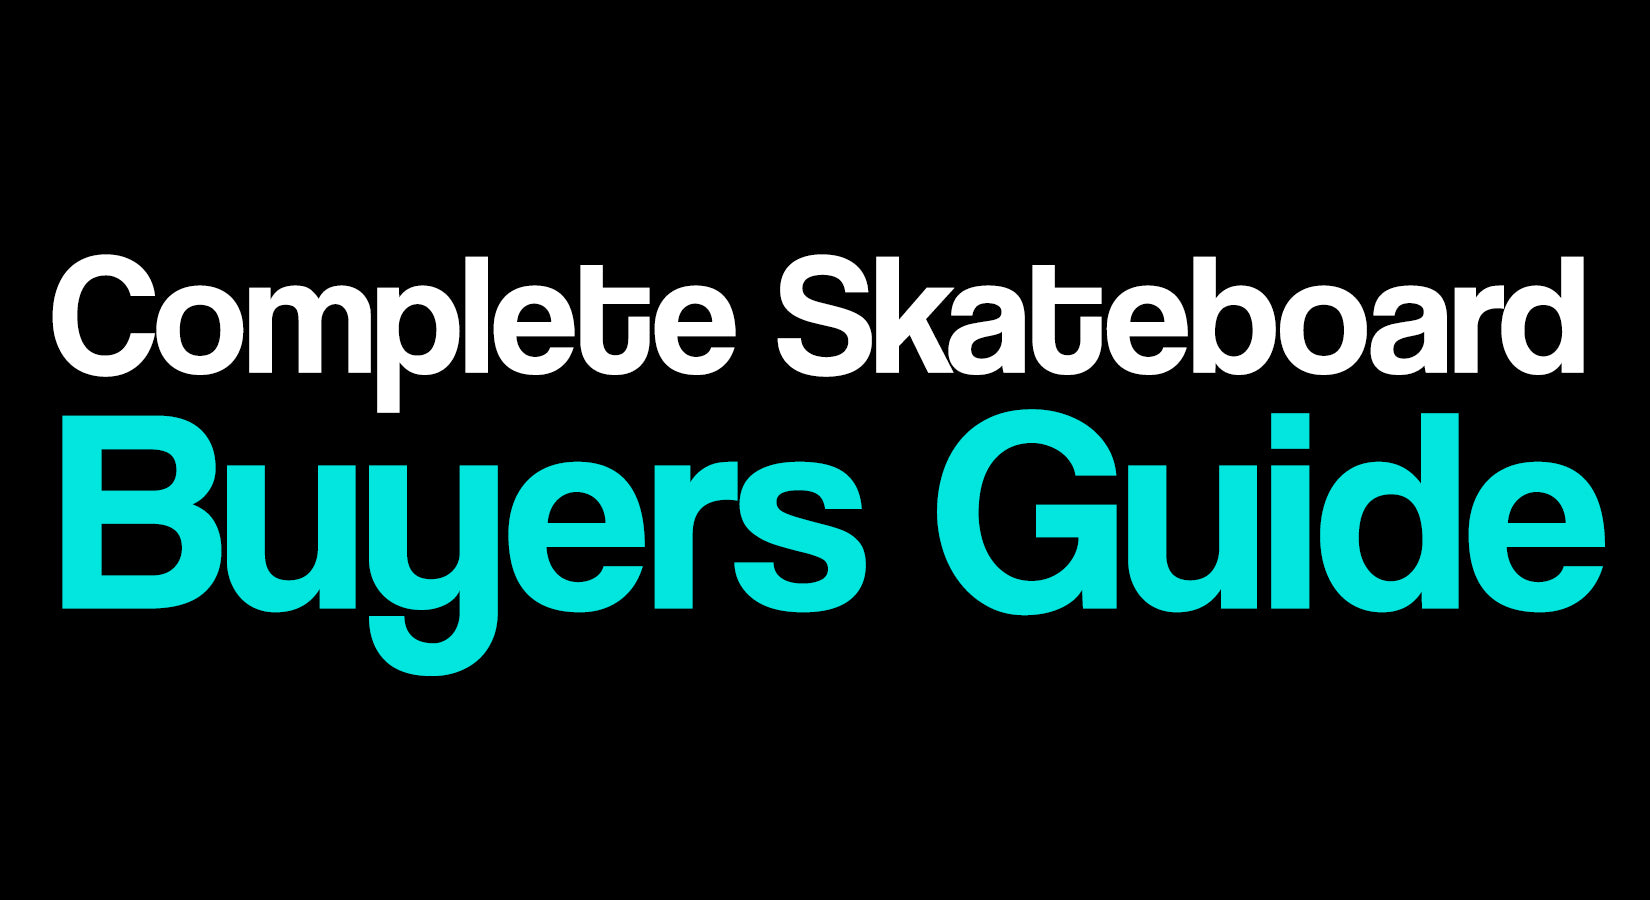 Complete Skateboards Buyers Guide